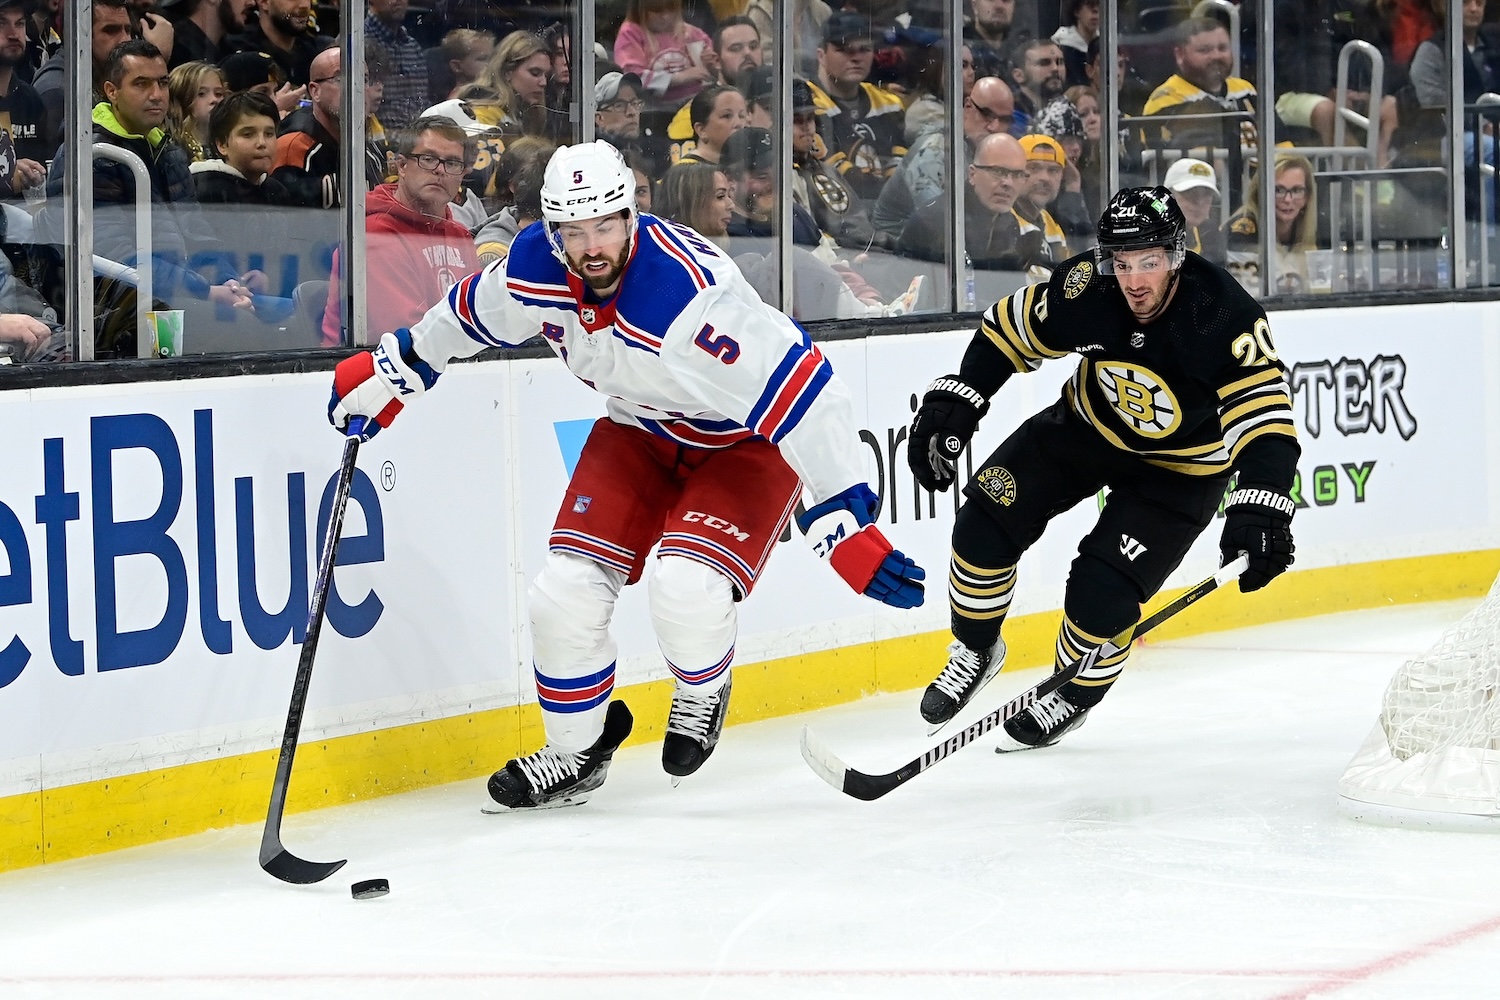 Sep 24, 2023; Boston, Massachusetts, USA; New York Rangers defenseman Ben Harpur (5) controls the puck in front of Boston Bruins center Jayson Megna (20) during the first period at TD Garden. Mandatory Credit: Eric Canha-USA TODAY Sports